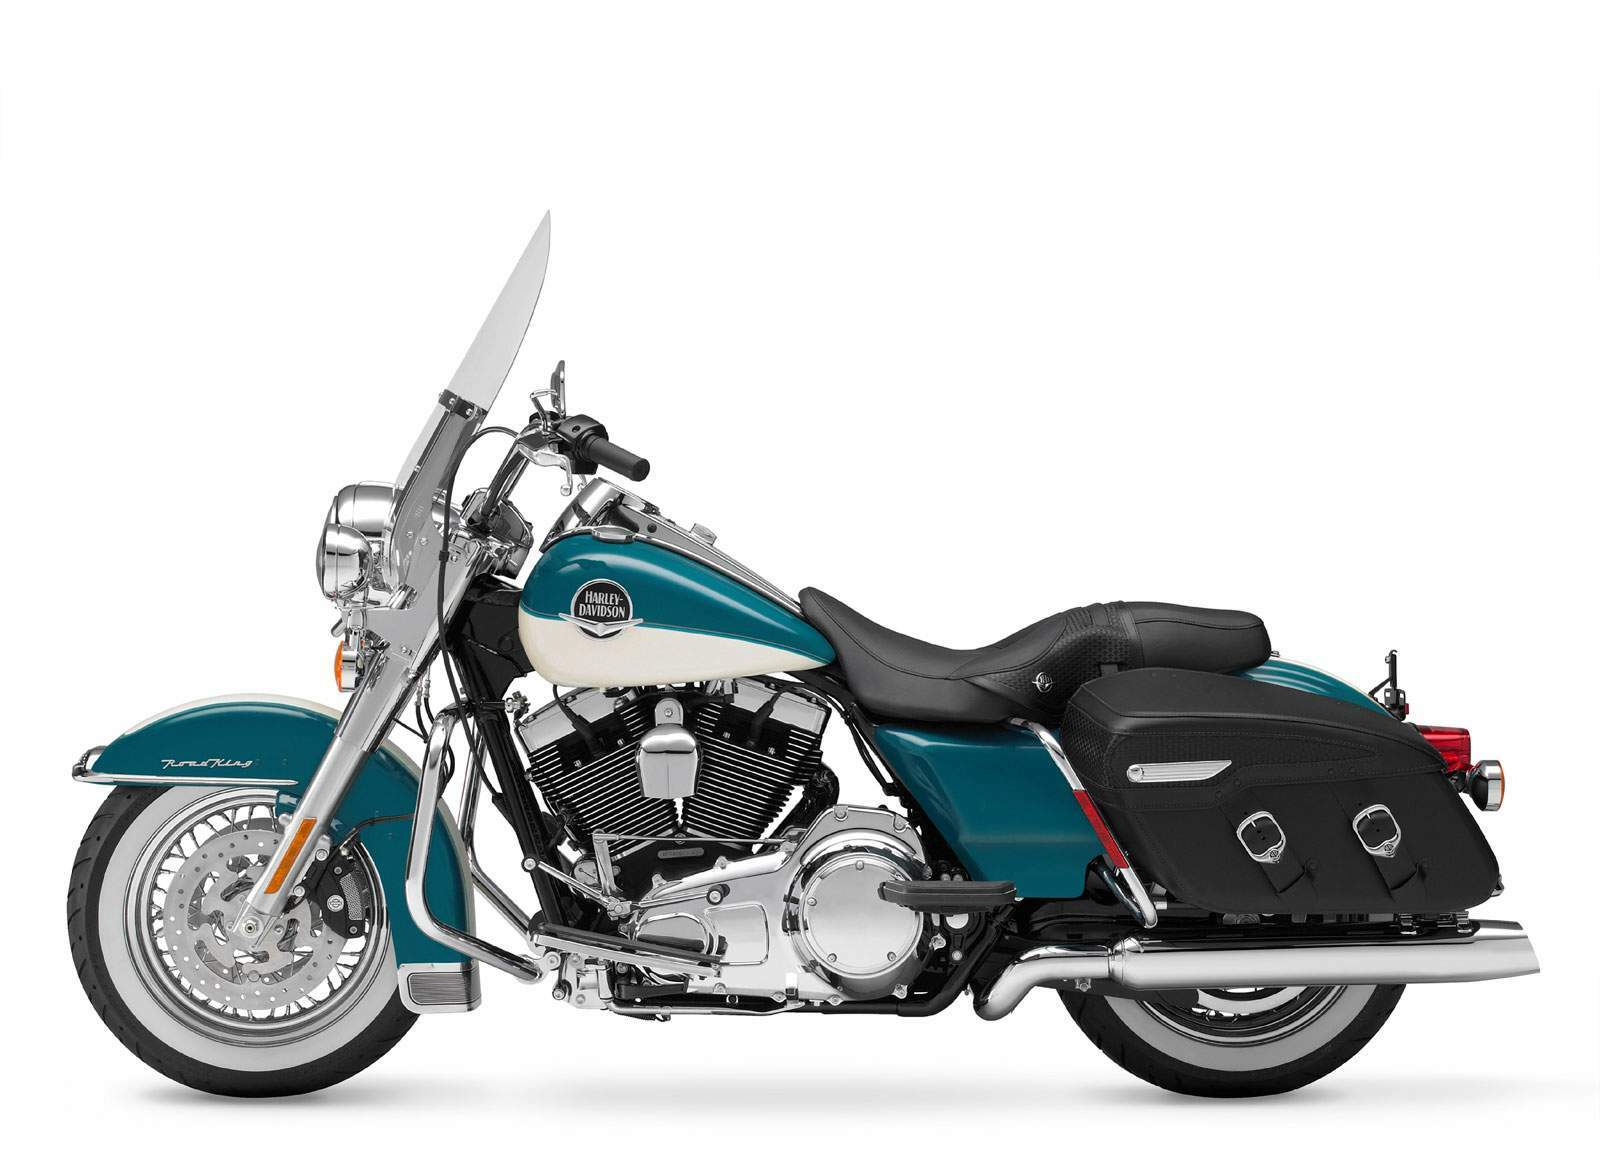 De l'Electra au Road King. - Page 2 Harley%20%20FLHRCI%20Road%20King%20Classic%2009